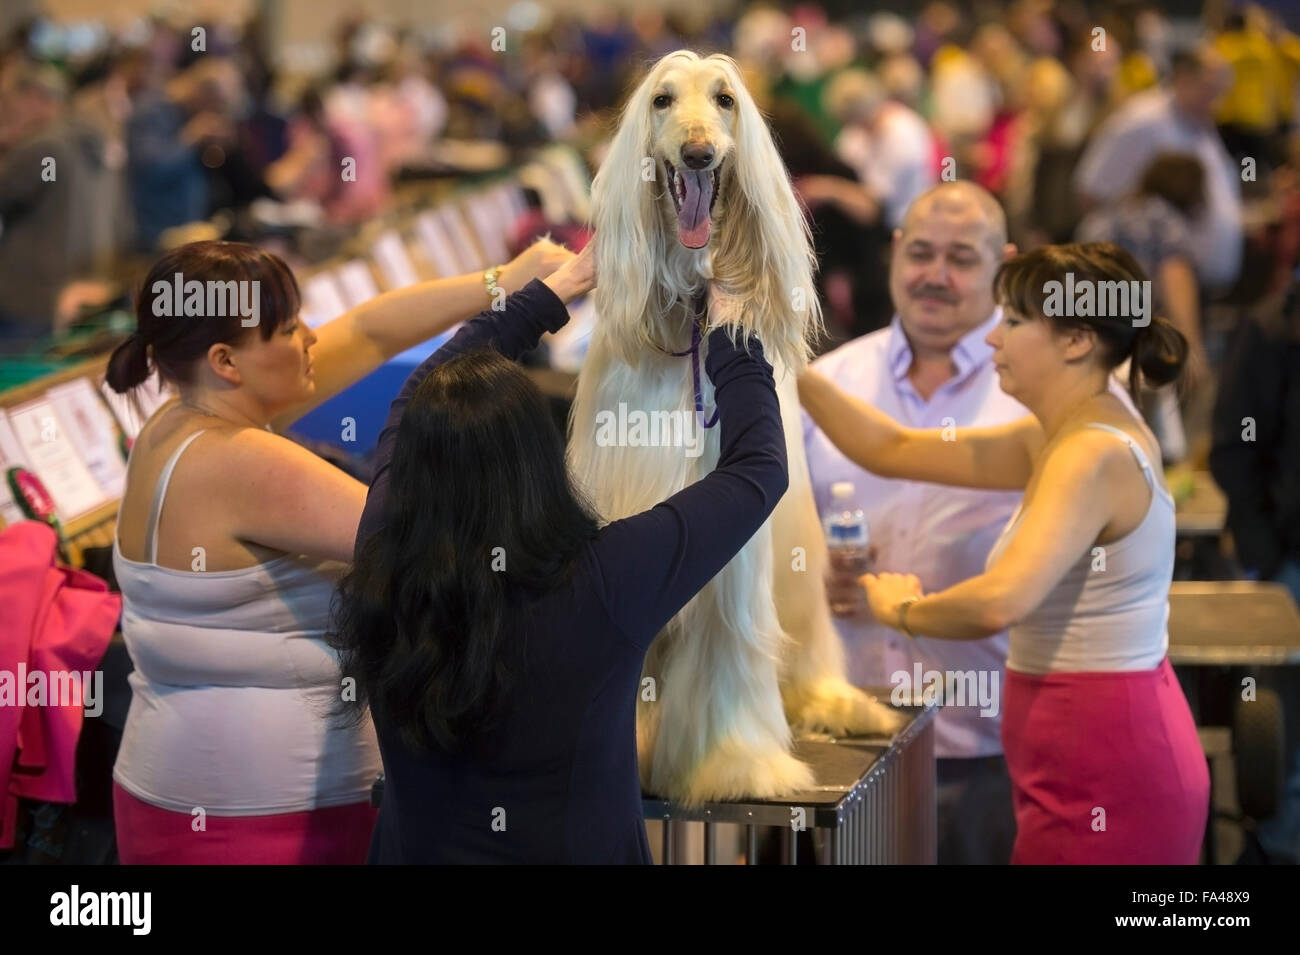 Crufts dog show at the NEC, Birmingham - an Afghan Hound with the pet name ‘Marcus’ is groomed before showing Stock Photo